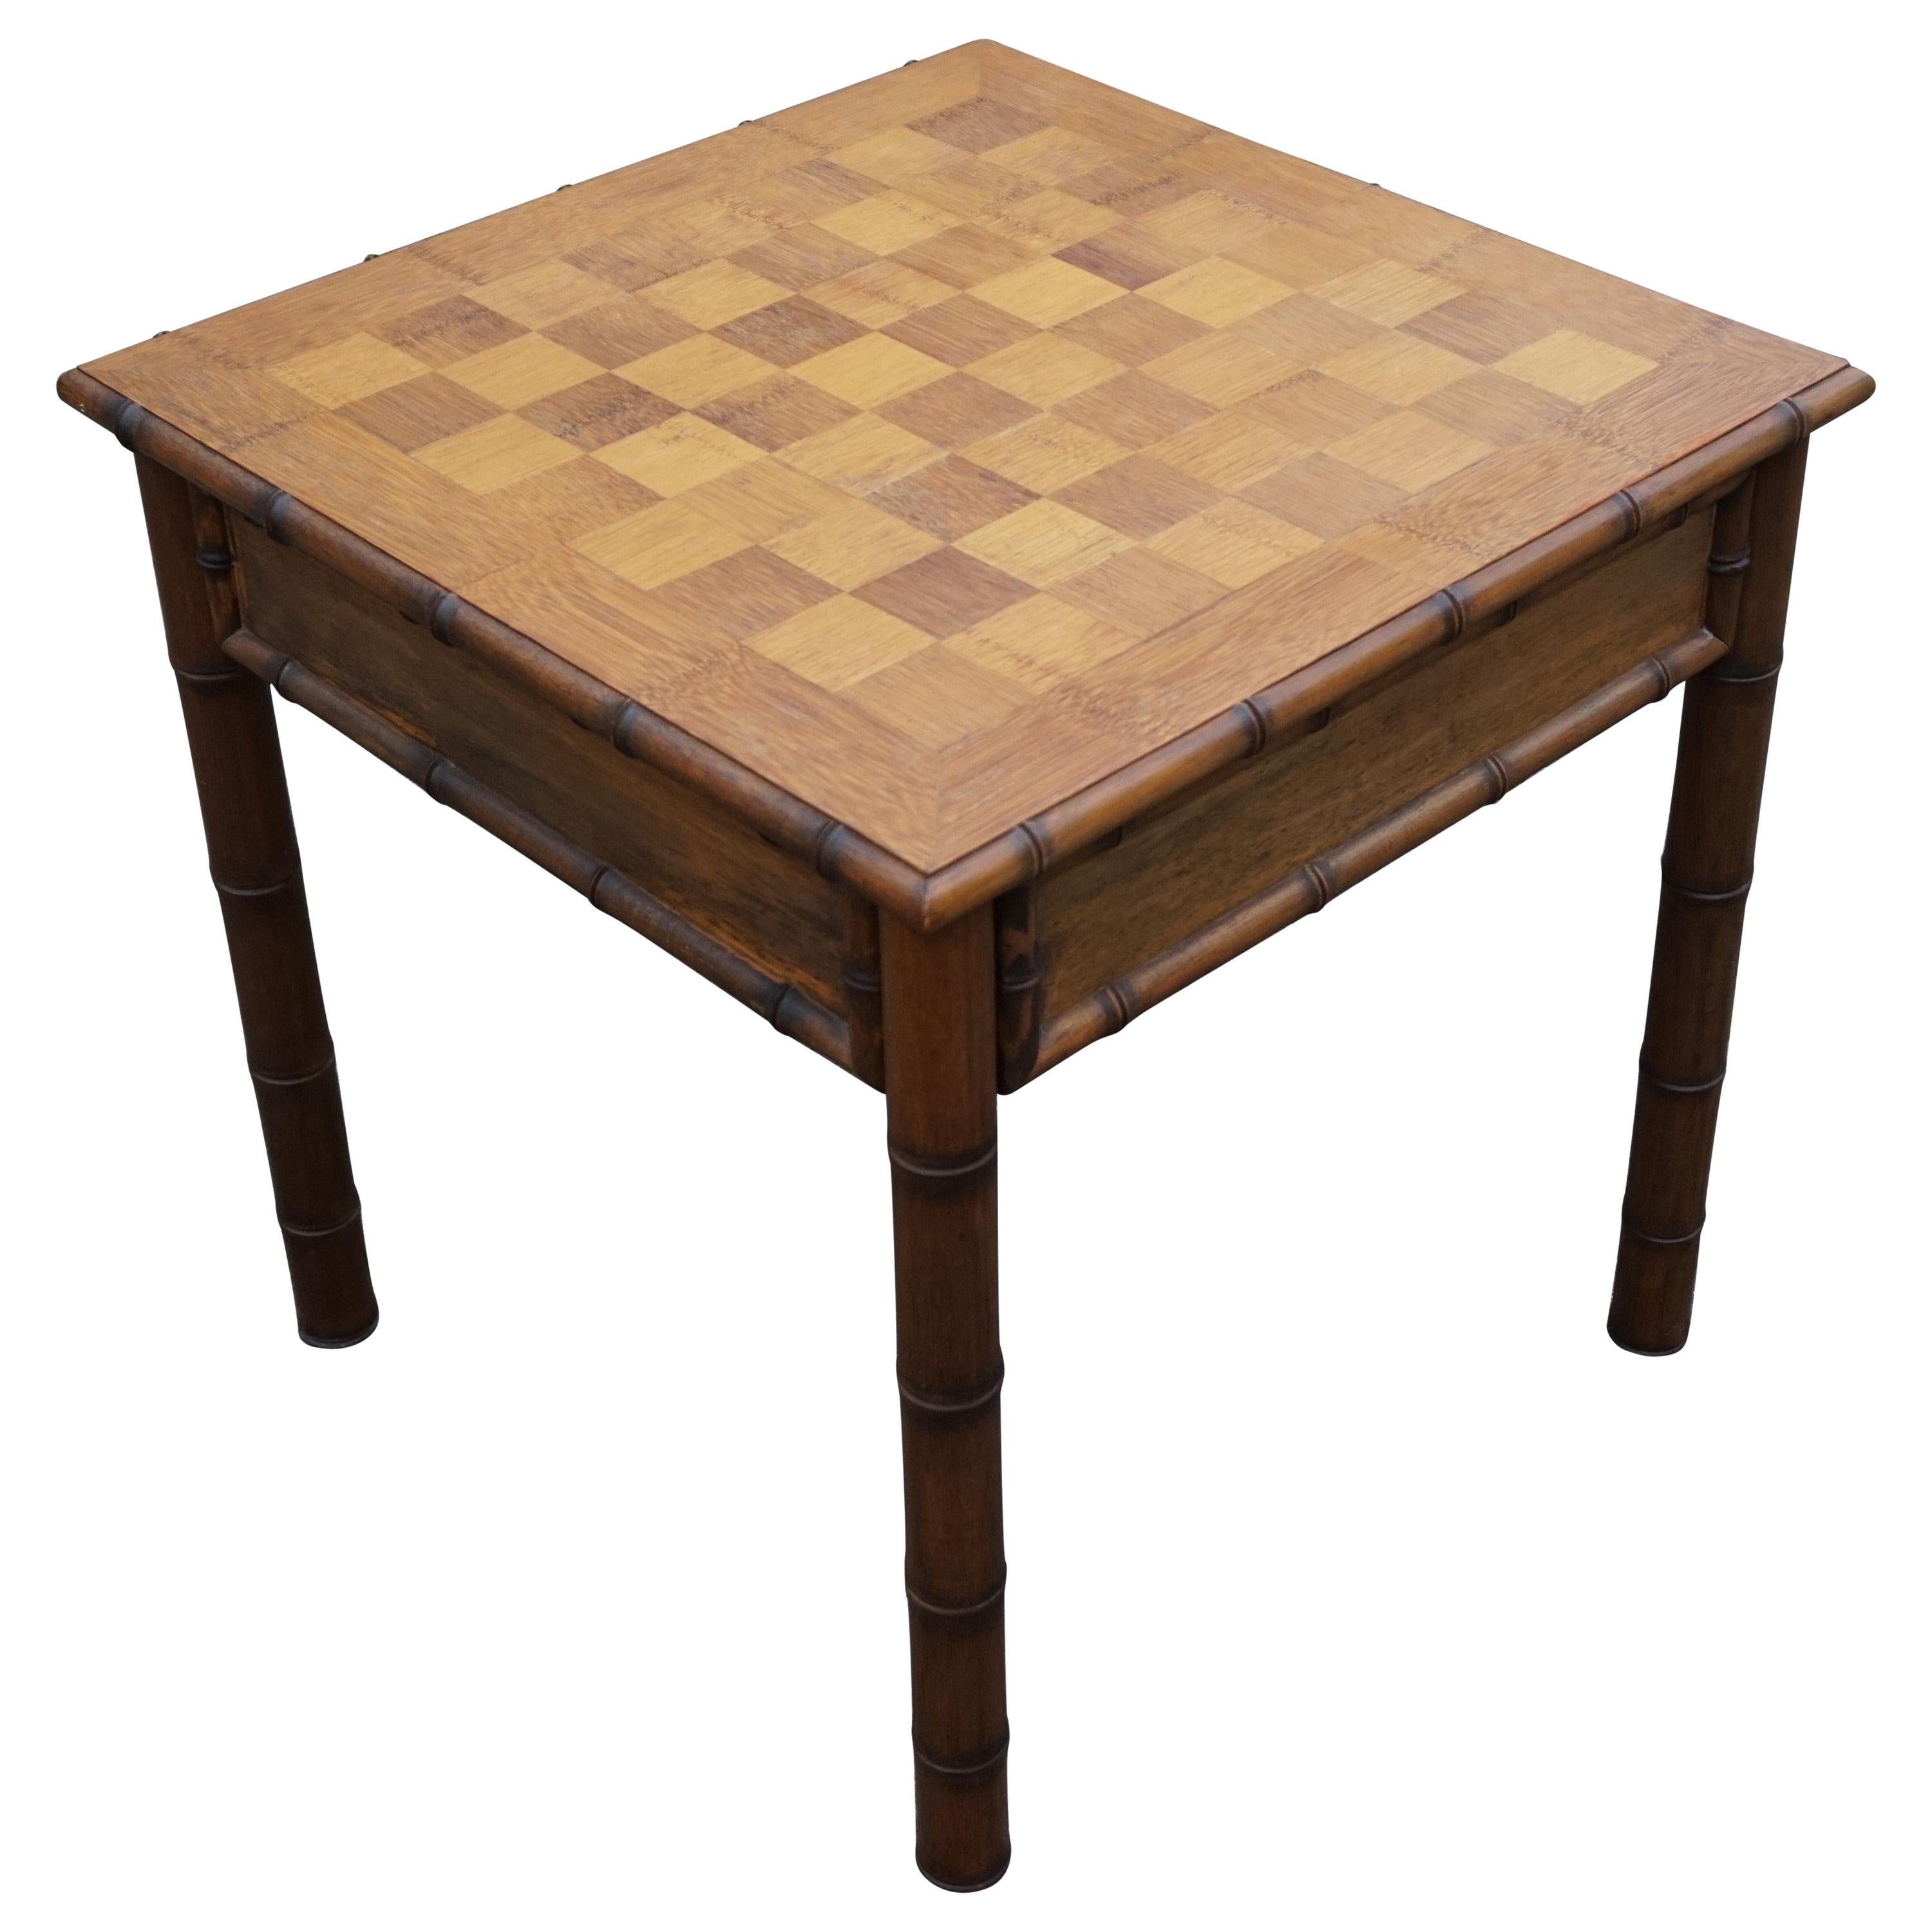 Rare & Superb Condition Midcentury Made Wooden Faux Bamboo Chess Table & Pieces